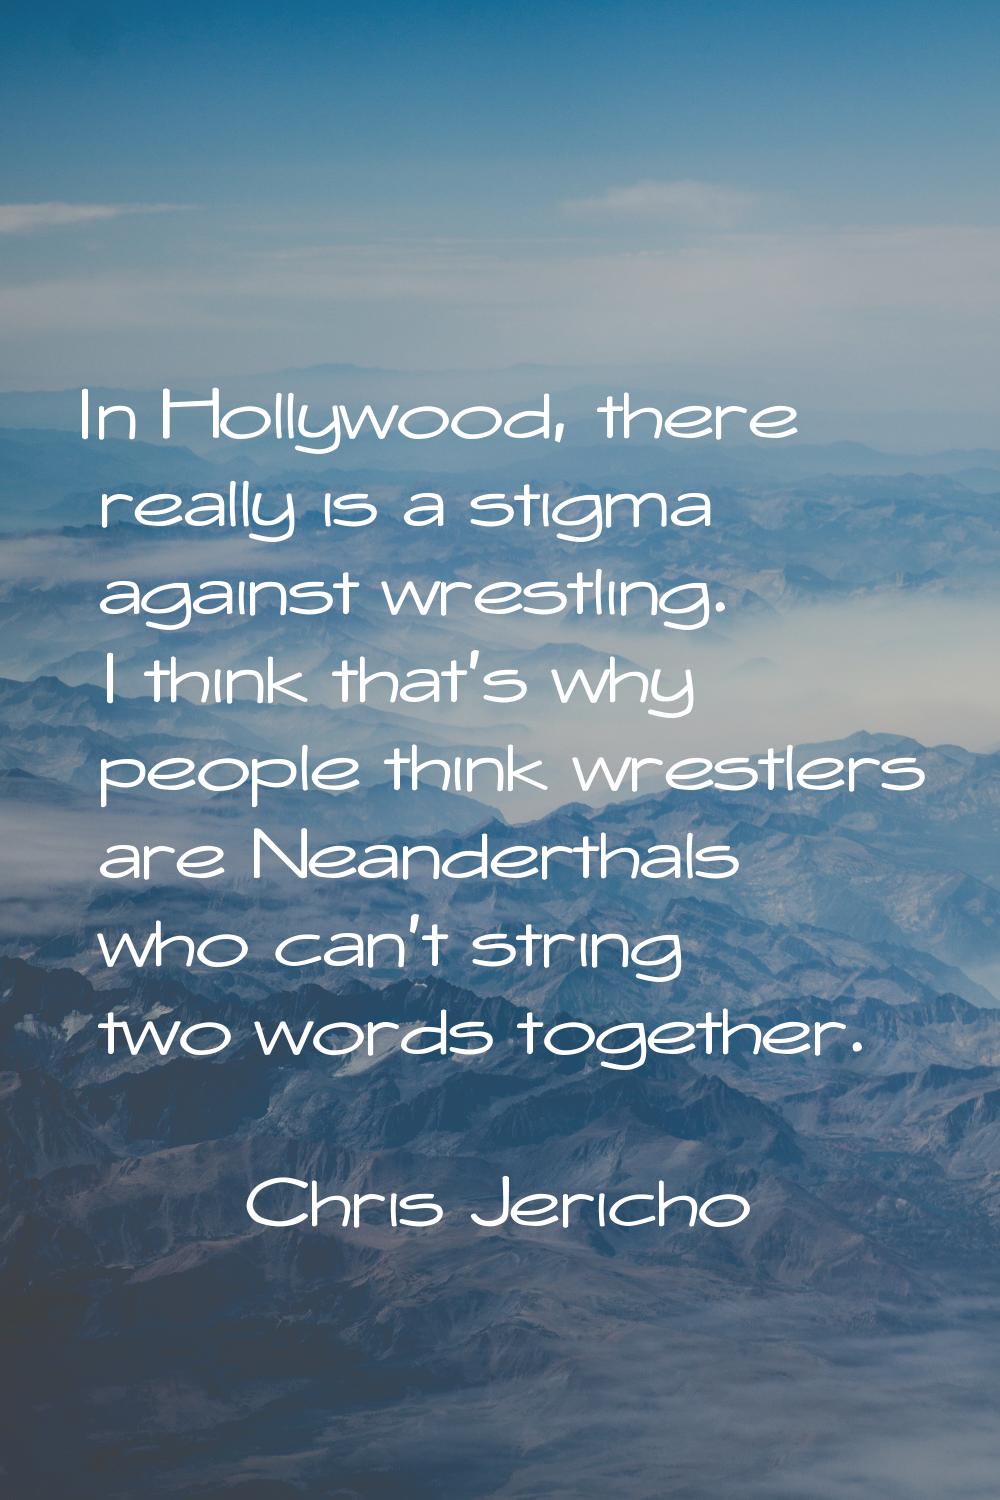 In Hollywood, there really is a stigma against wrestling. I think that's why people think wrestlers